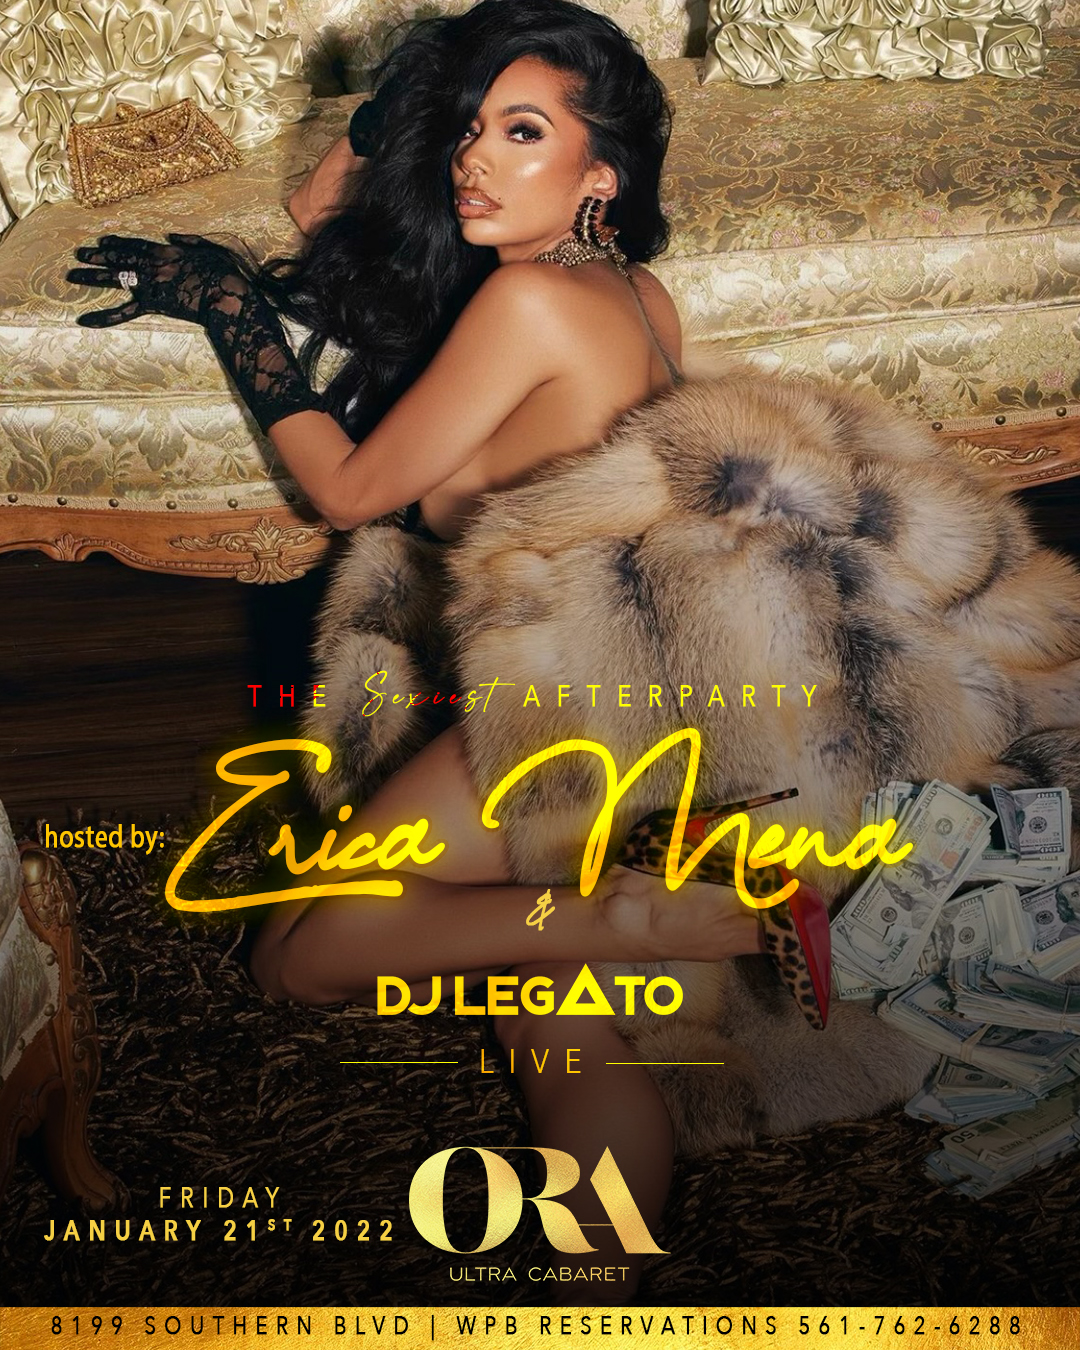 Erica Mena and DJ Legato host The Sexiest Afterparty